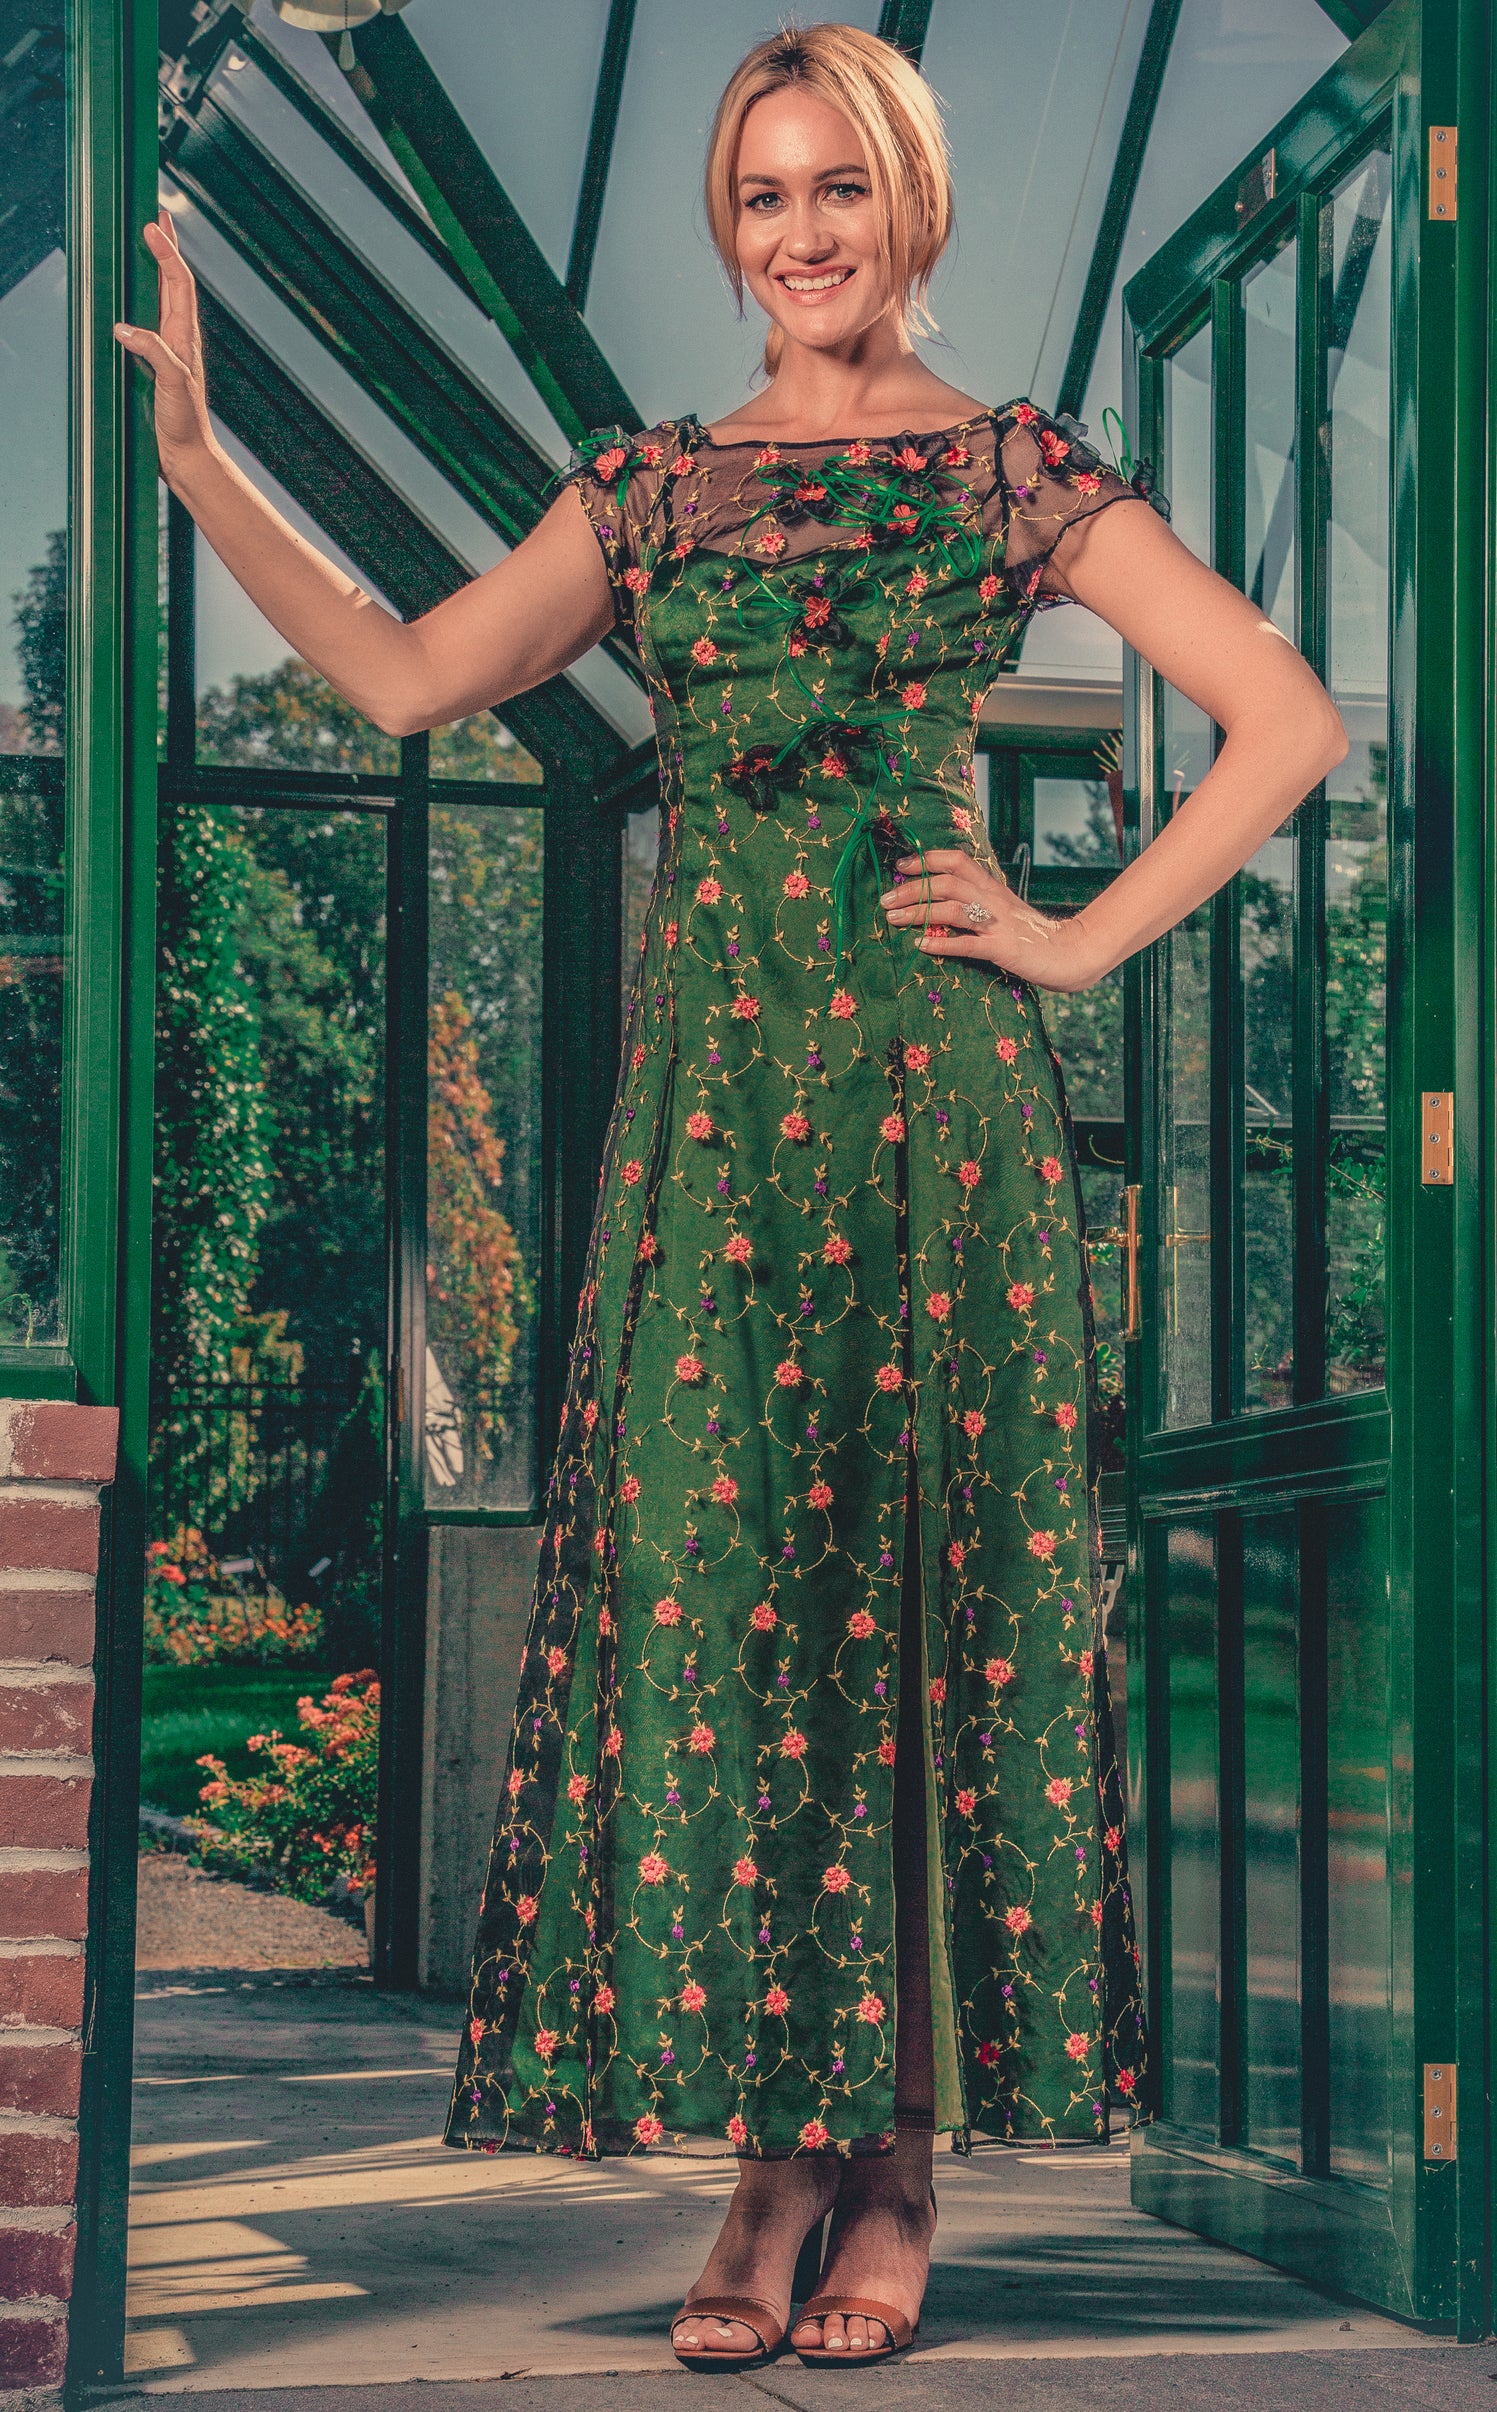 anna nieman designer dress Boston. A long gown from embroidered silk organza, has a flattering svelte silhouette. Hand-made flowers give a delicate and luxurious look.